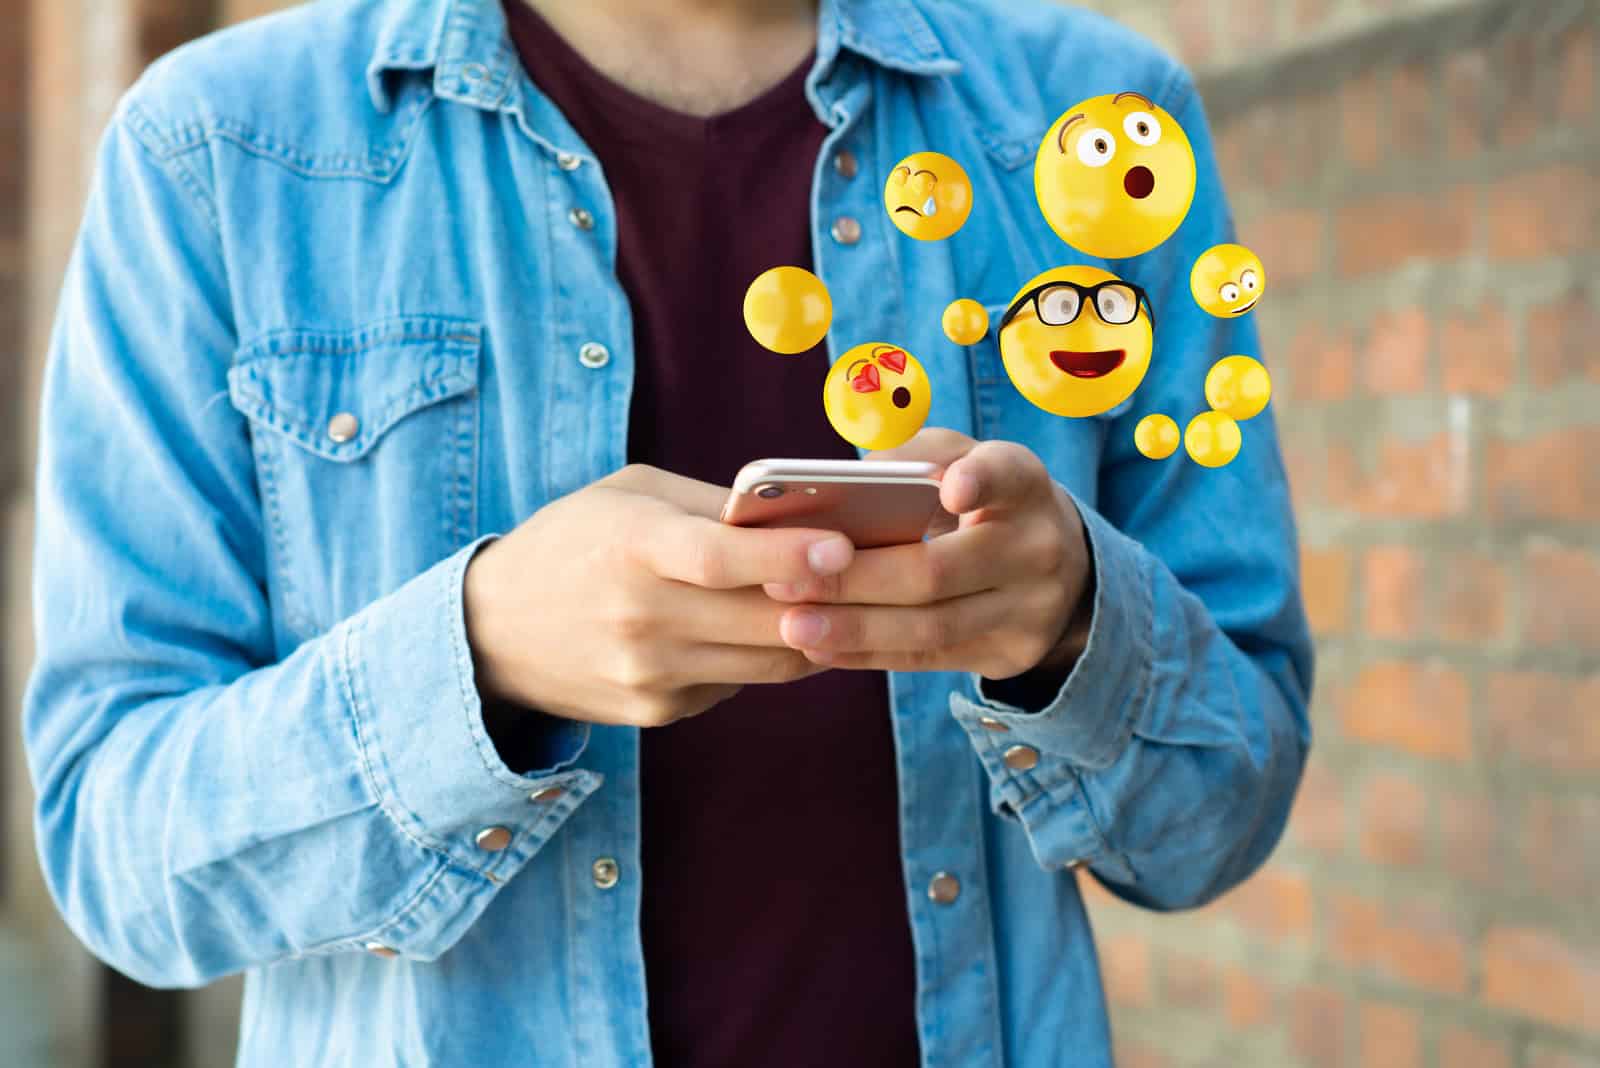 25 Emojis Guys Use When They Love You (+ Their Secret Meanings)